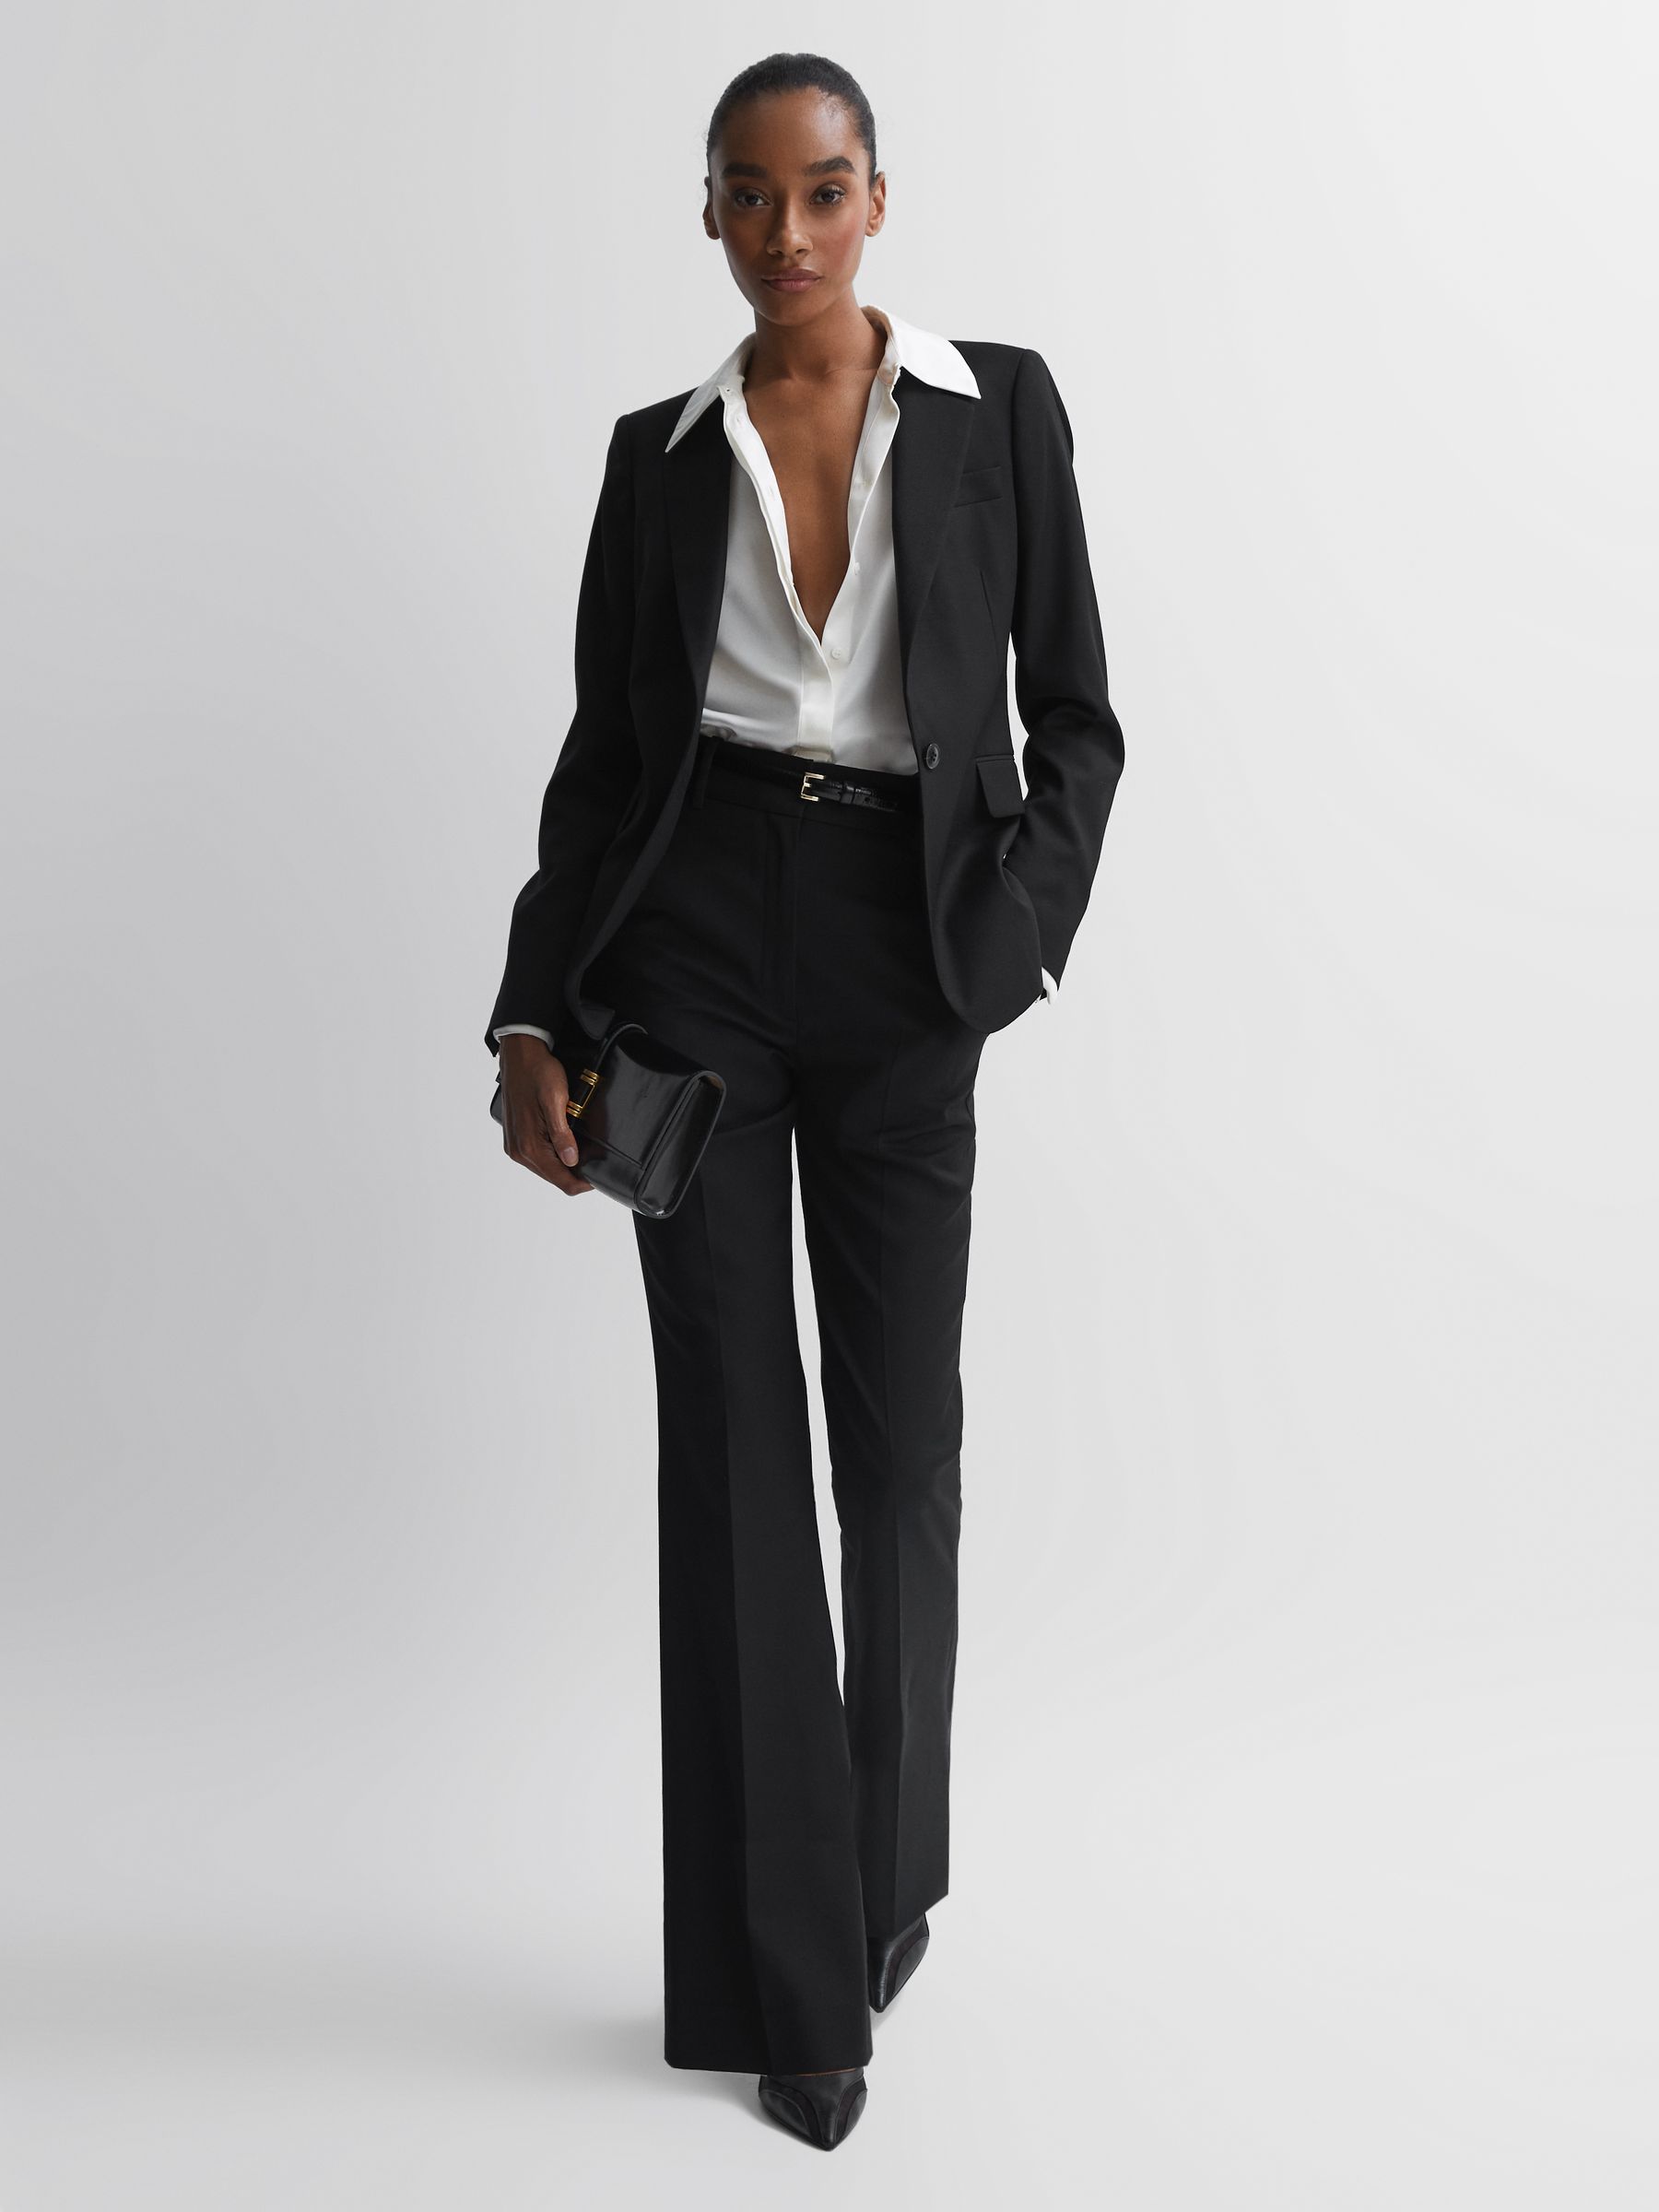 Reiss Haisley Single Breasted Suit Blazer | REISS USA